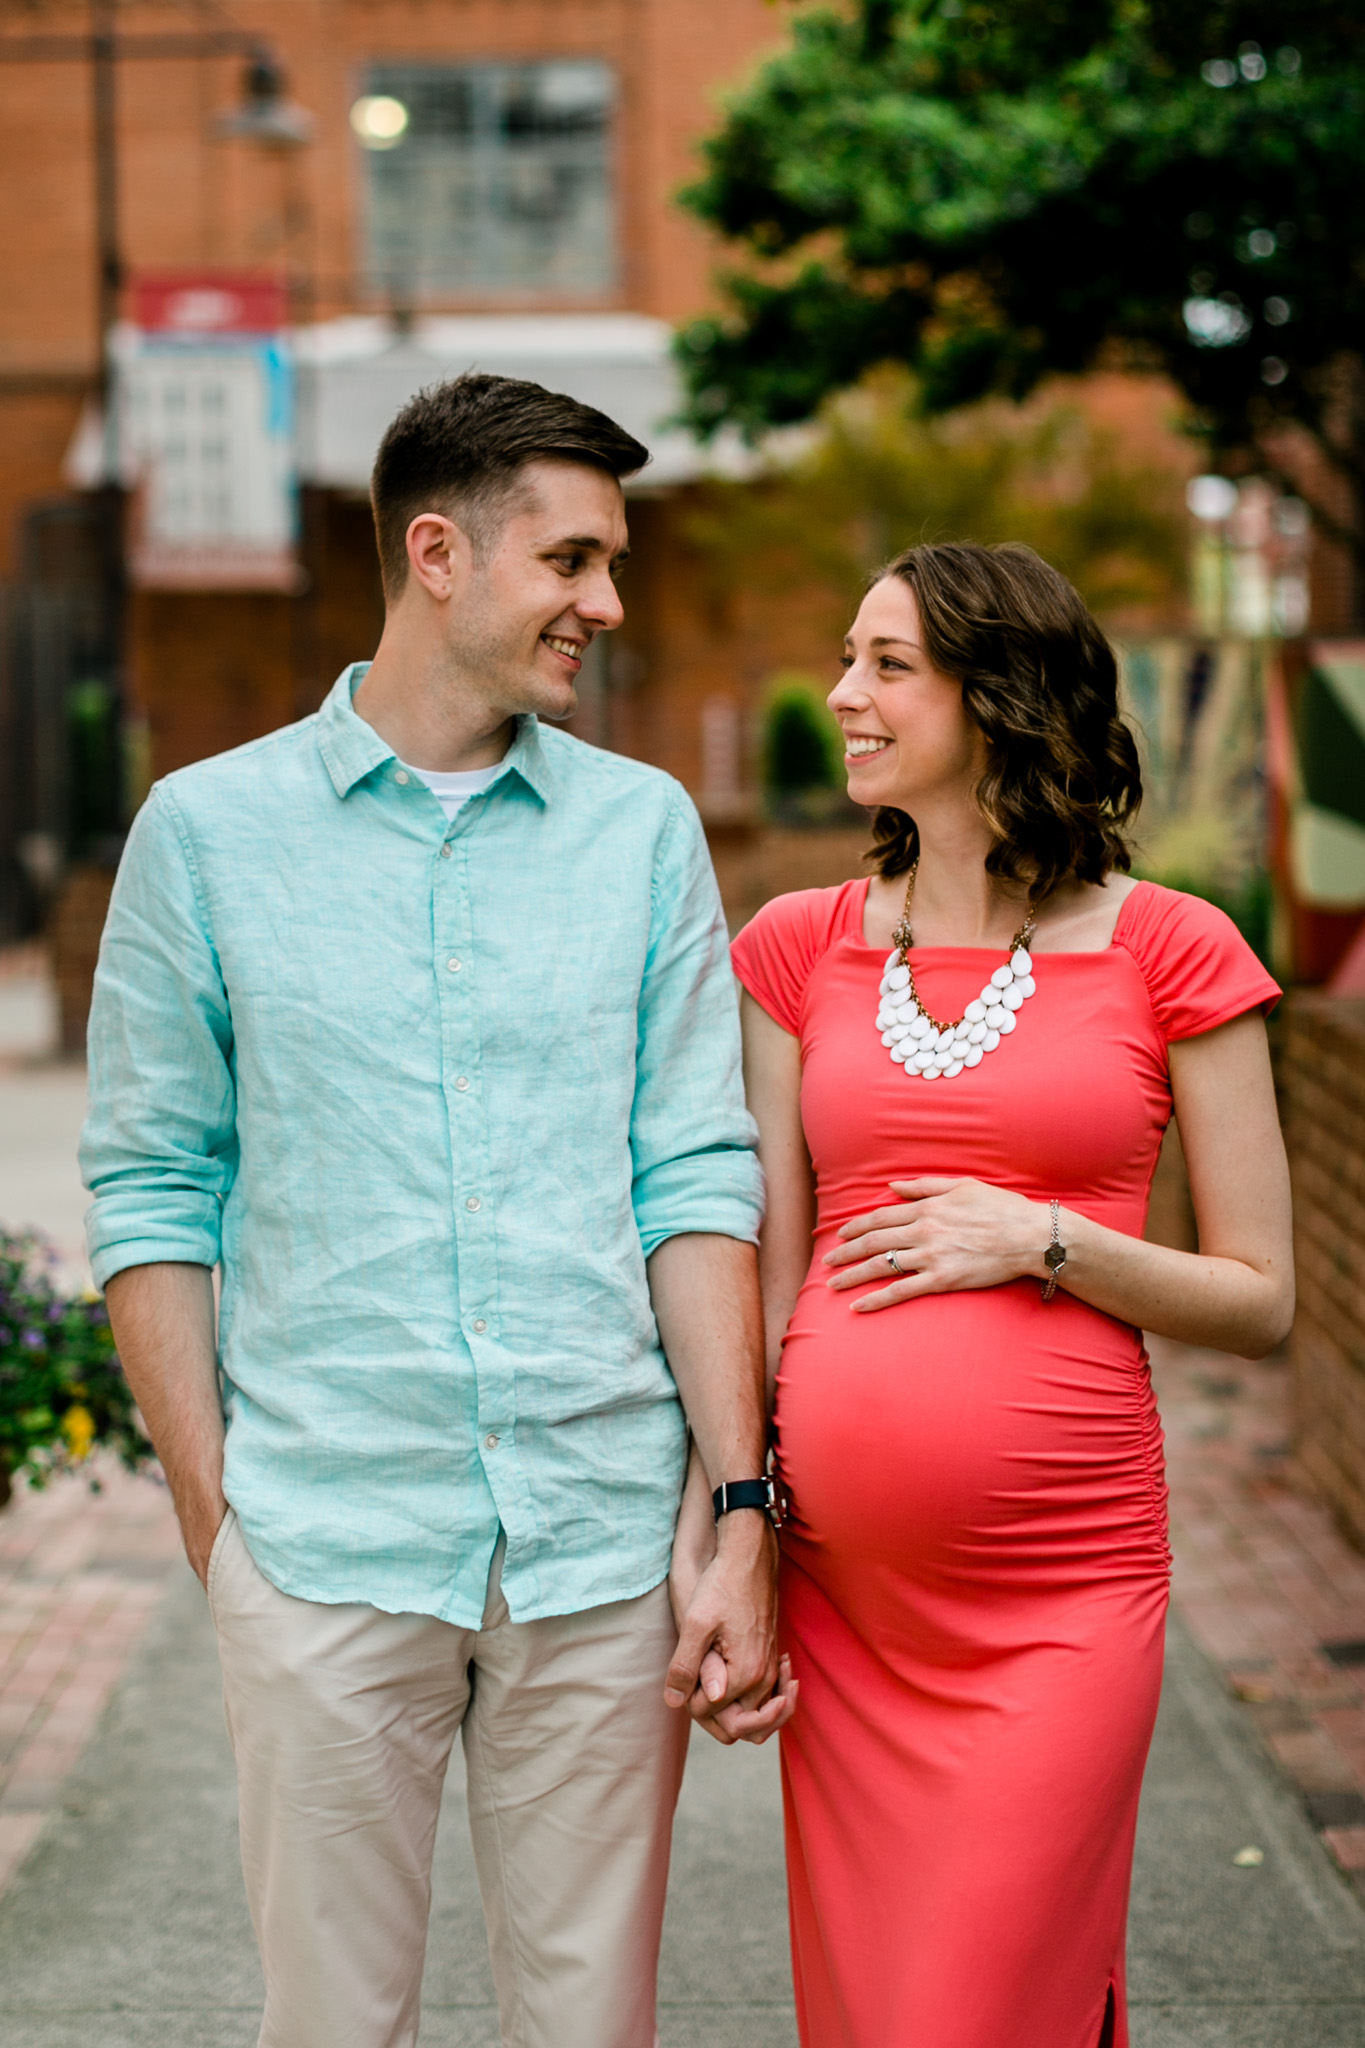 Couple smiling at each other and holding hands | Durham Newborn Photographer | By G. Lin Photography